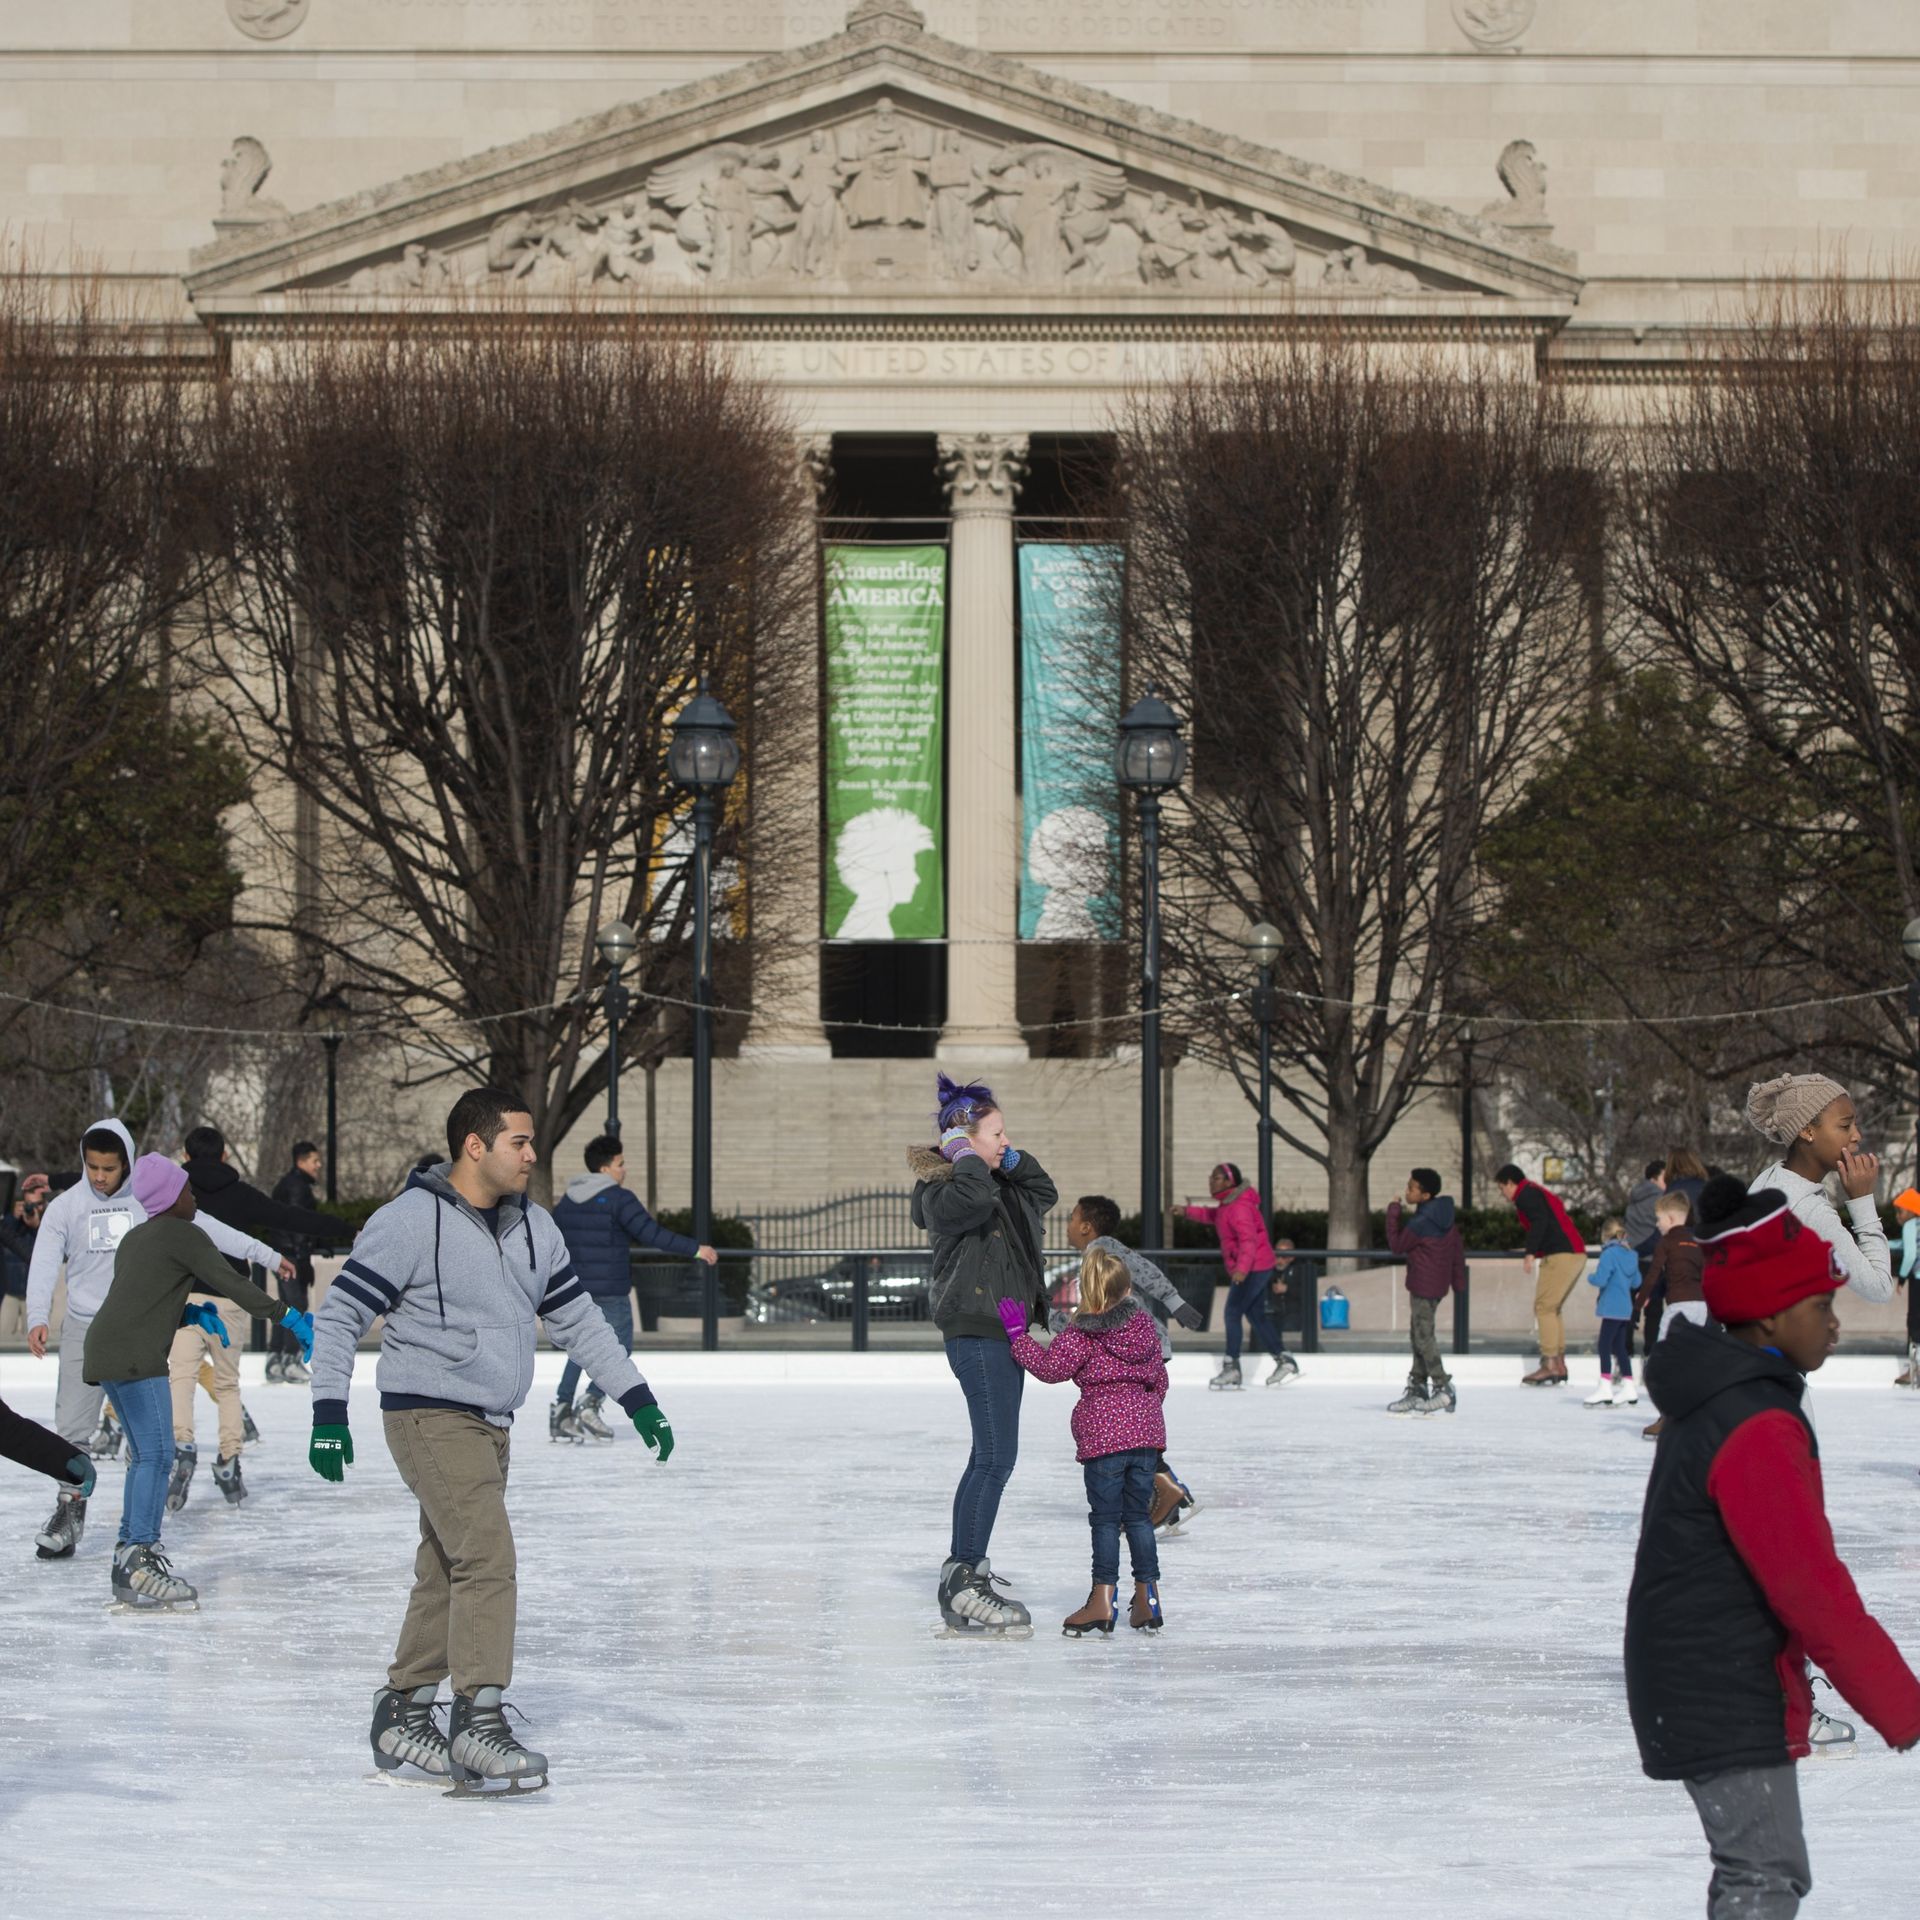 People ice skate at the National Gallery of Art Sculpture Garden ice rink.